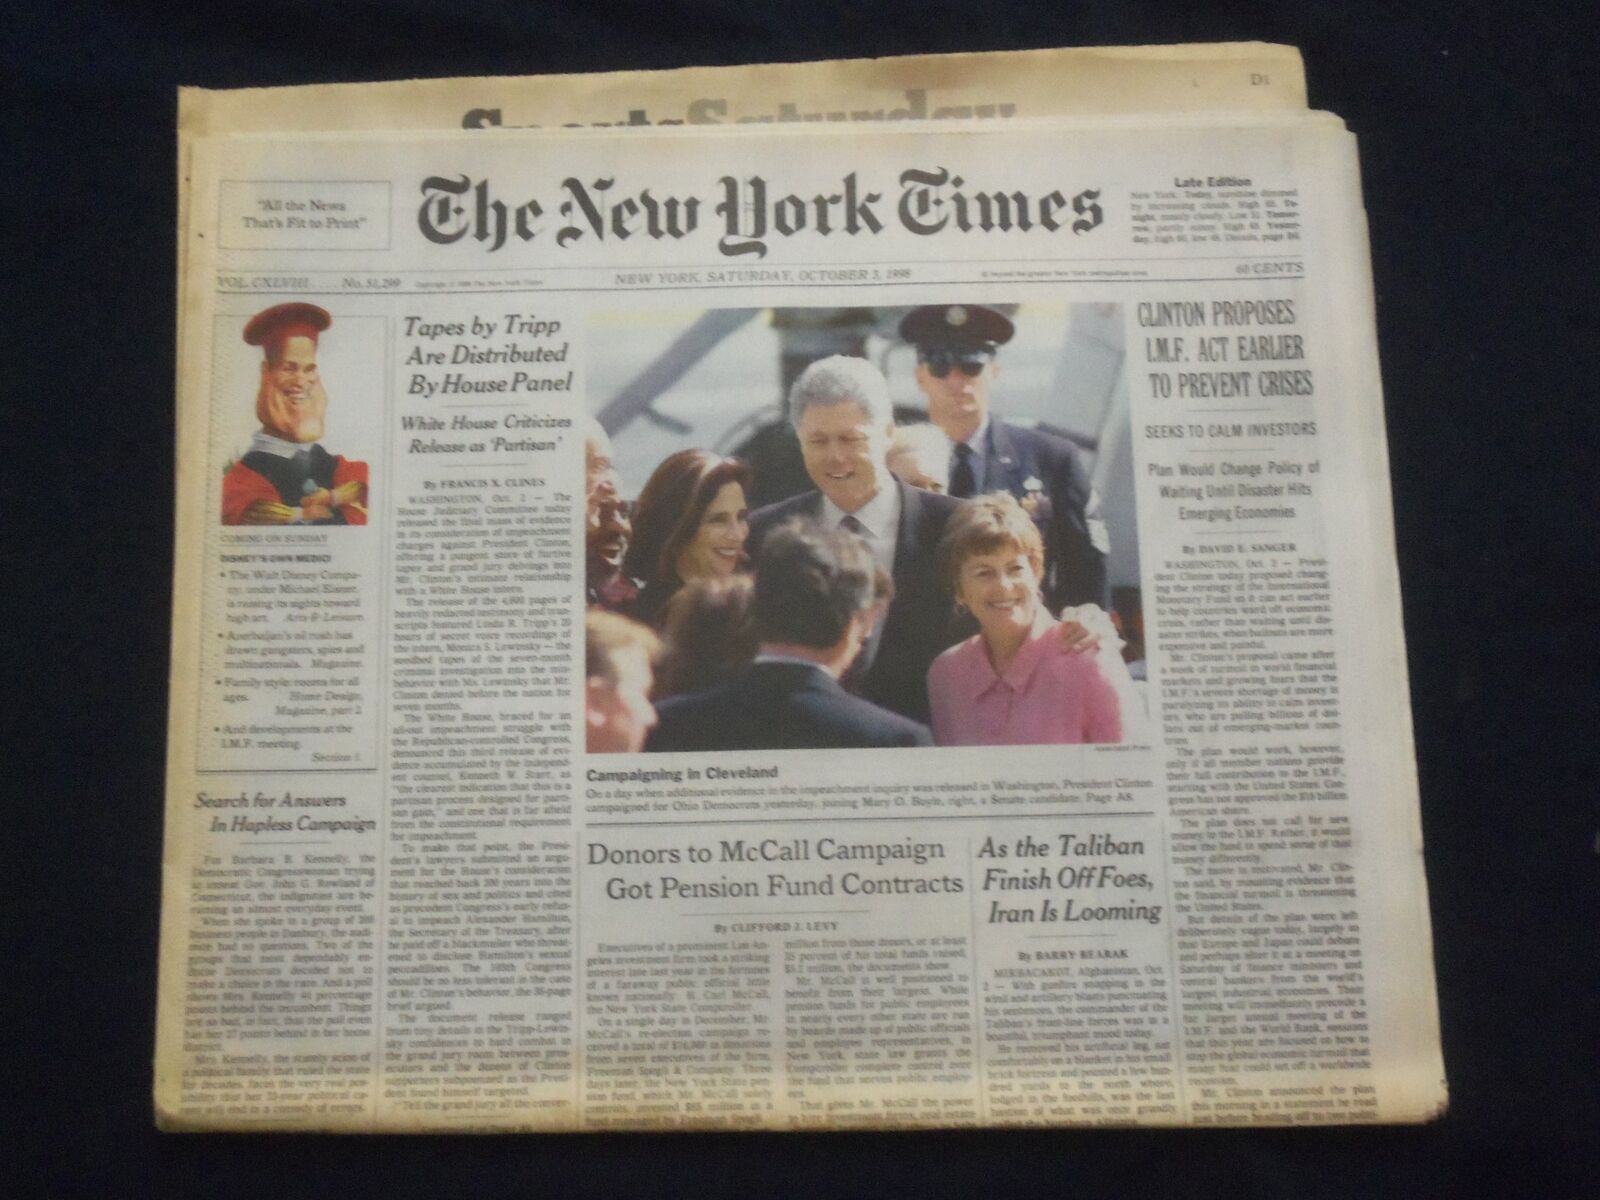 1998 OCT 3 NEW YORK TIMES NEWSPAPER - CLINTON PROPOSES IMF ACT EARLIER - NP 7092